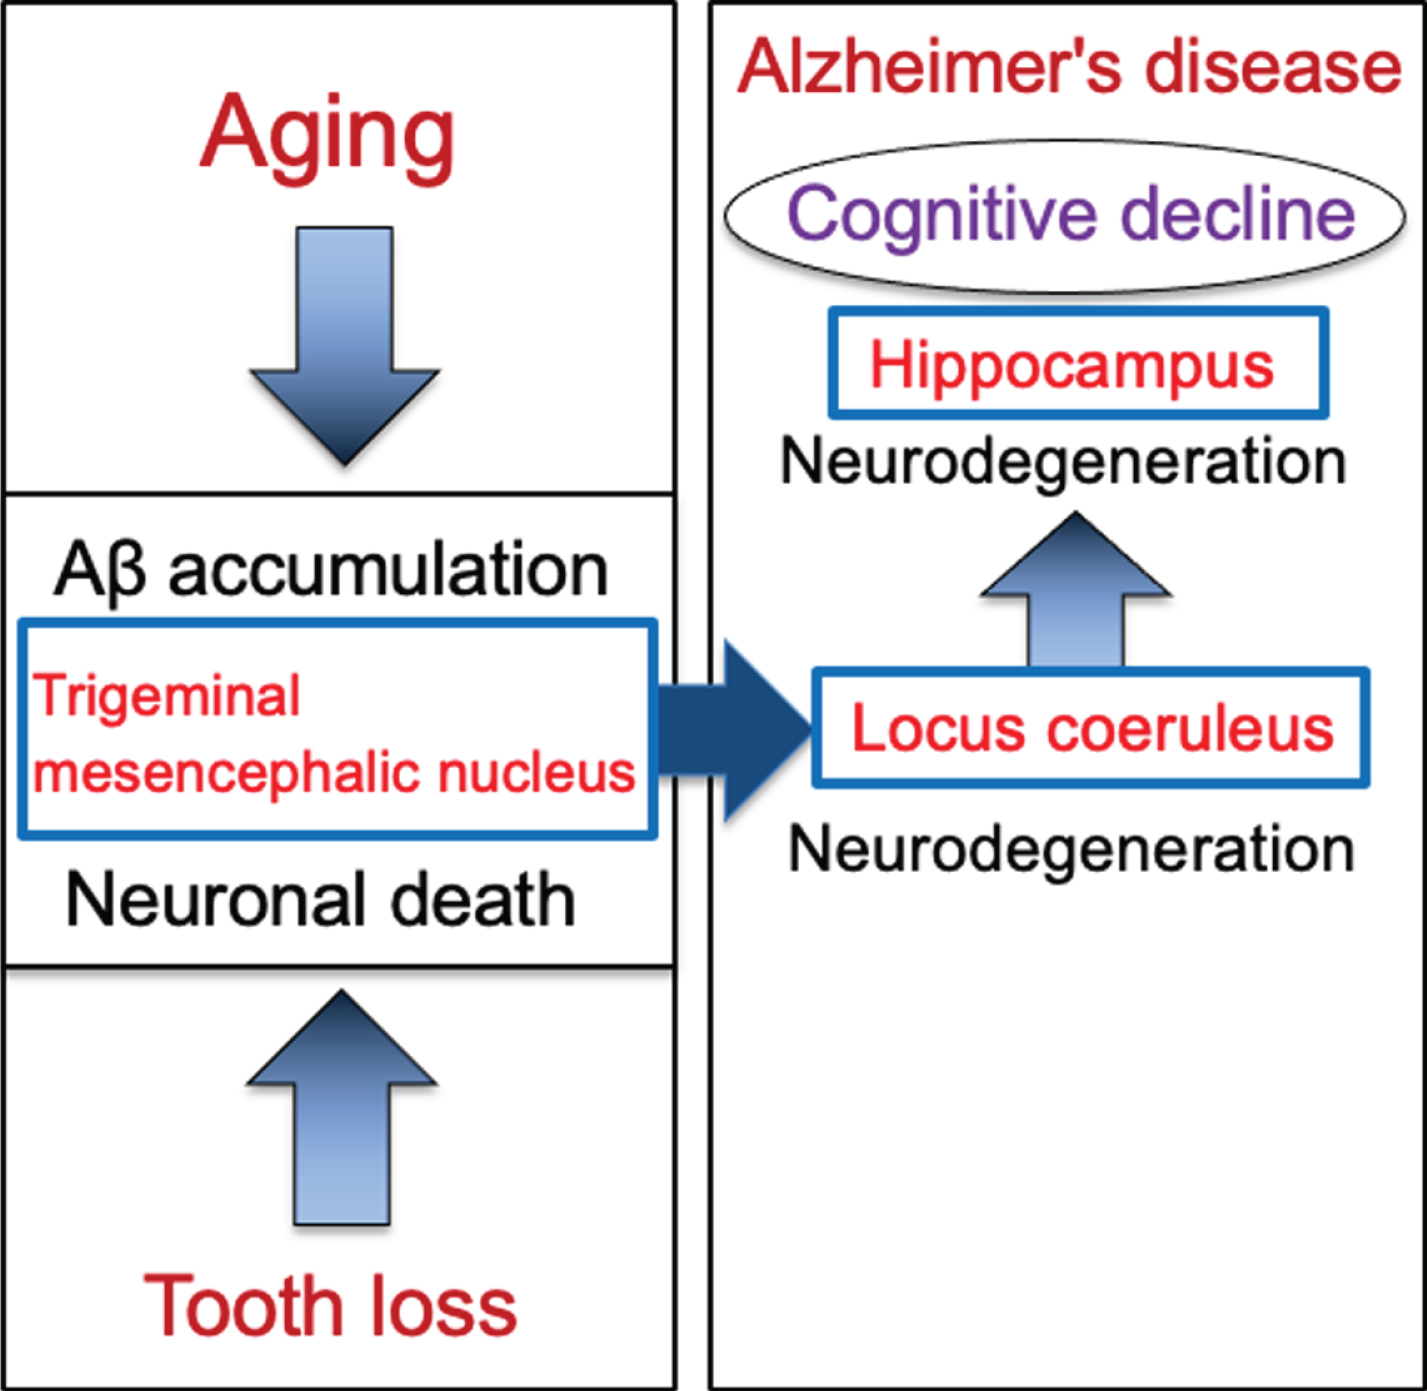 Schematic to show the cascade from tooth loss to the progression of Alzheimer’s disease via the trigeminal mesencephalic nucleus, locus coeruleus, and hippocampus. Aging leads to increase the intracellular Aβ accumulation in trigeminal mesencephalic nucleus (Vmes) neurons, and tooth loss leads to Vmes neuronal death. Release of Aβ by Vmes neuronal death causes neurodegeneration of adjacent locus coeruleus (LC) neurons, resulting in neuronal degeneration of hippocampal neurons that the LC neurons project. This neurodegenerative cascade of Vmes, LC and hippocampus accelerates the progression of Alzheimer’s disease.